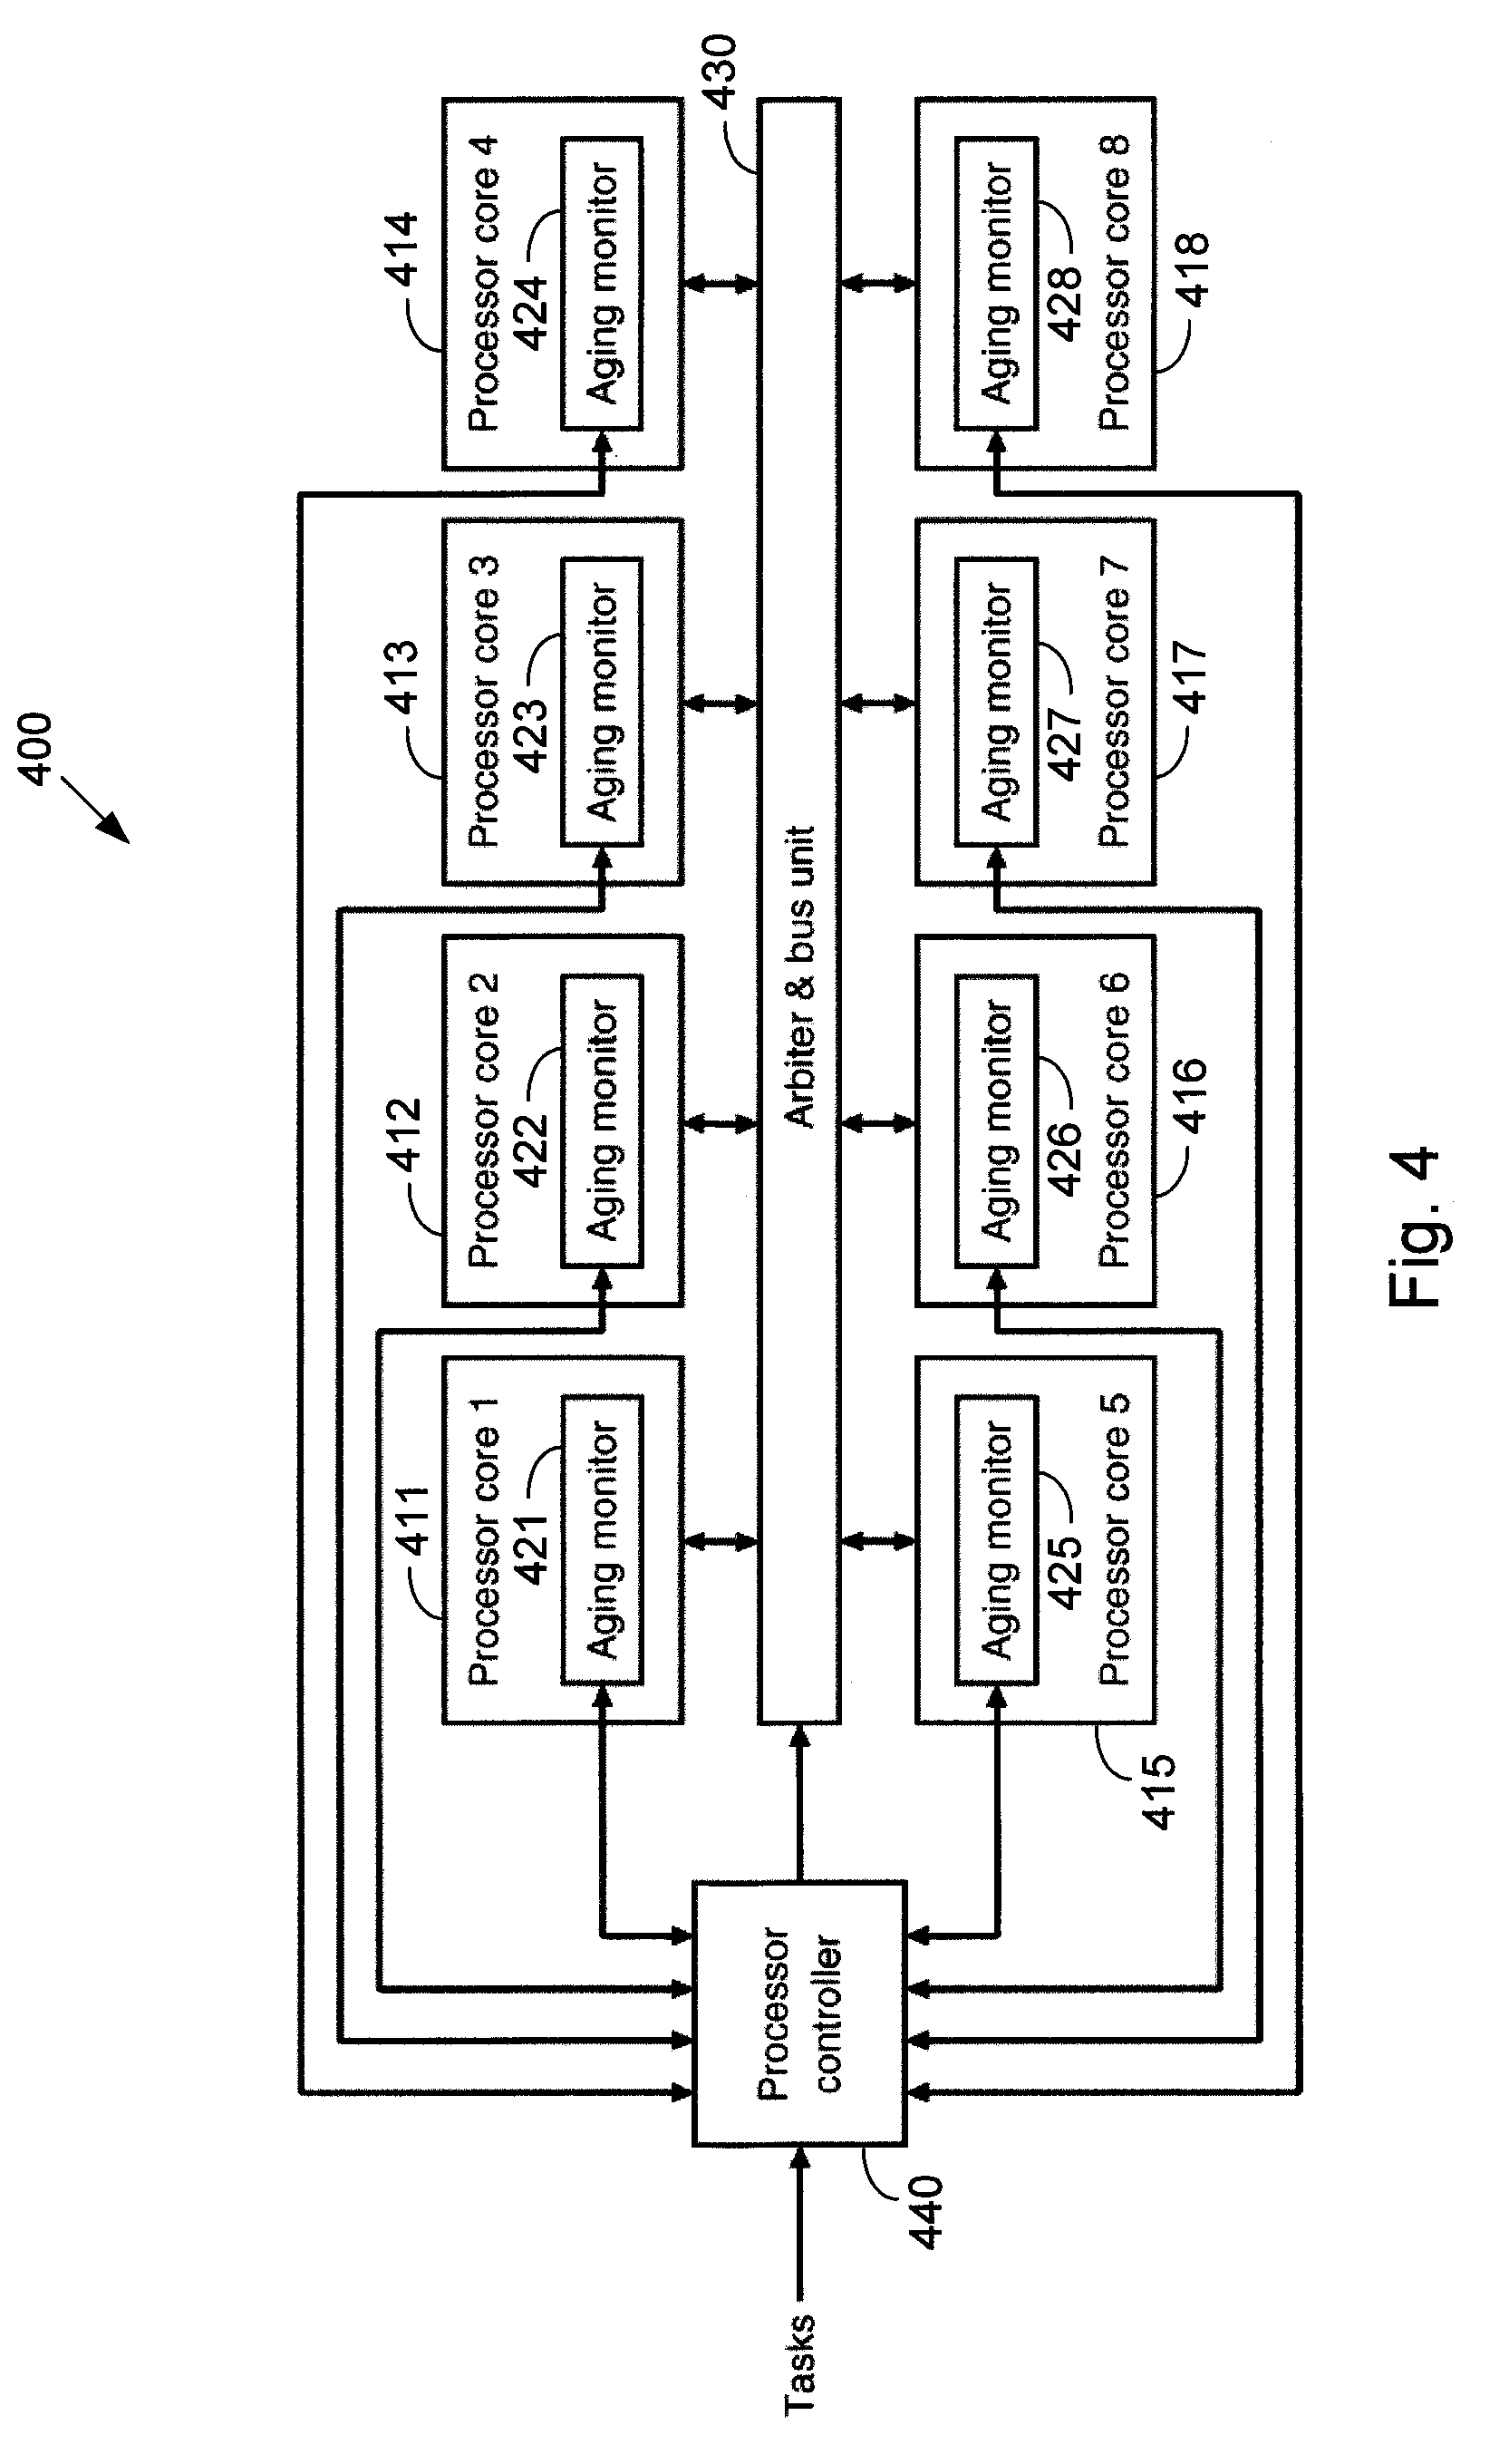 Systems and Methods for Improving the Reliability of a Multi-Core Processor